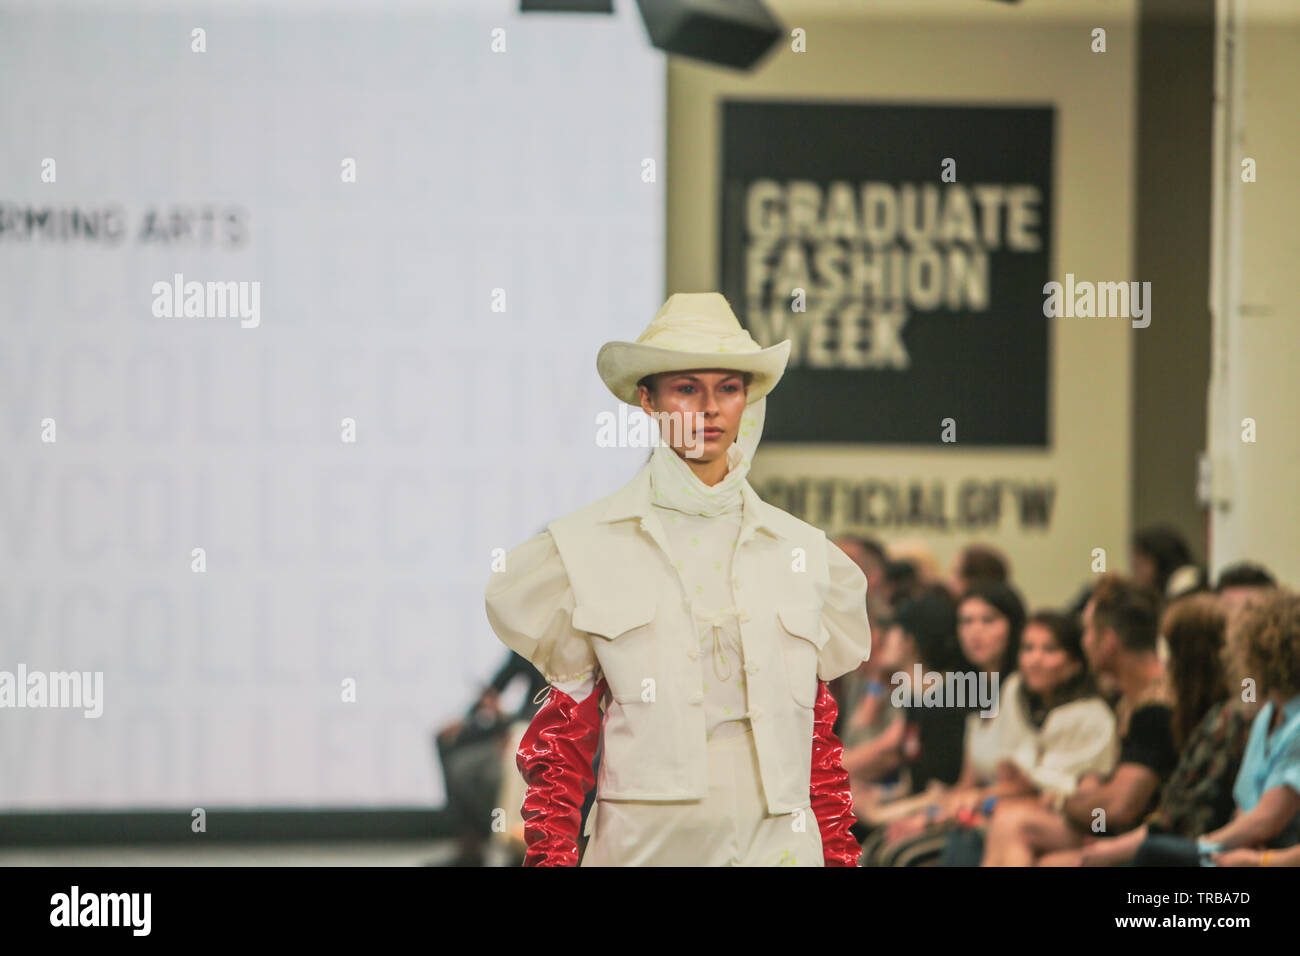 London, UK. 02nd June, 2019. The Graduate Fashion Week Exhibition 2019 showcasing the  the best graduate fashion from around the country. Presenting 90  UK and International universities, alongside exciting and unique stands, food, bar, leading industry and VIP talks in the GFW Live talk space and much more. Credit: Paul Quezada-Neiman/Alamy Live News Stock Photo